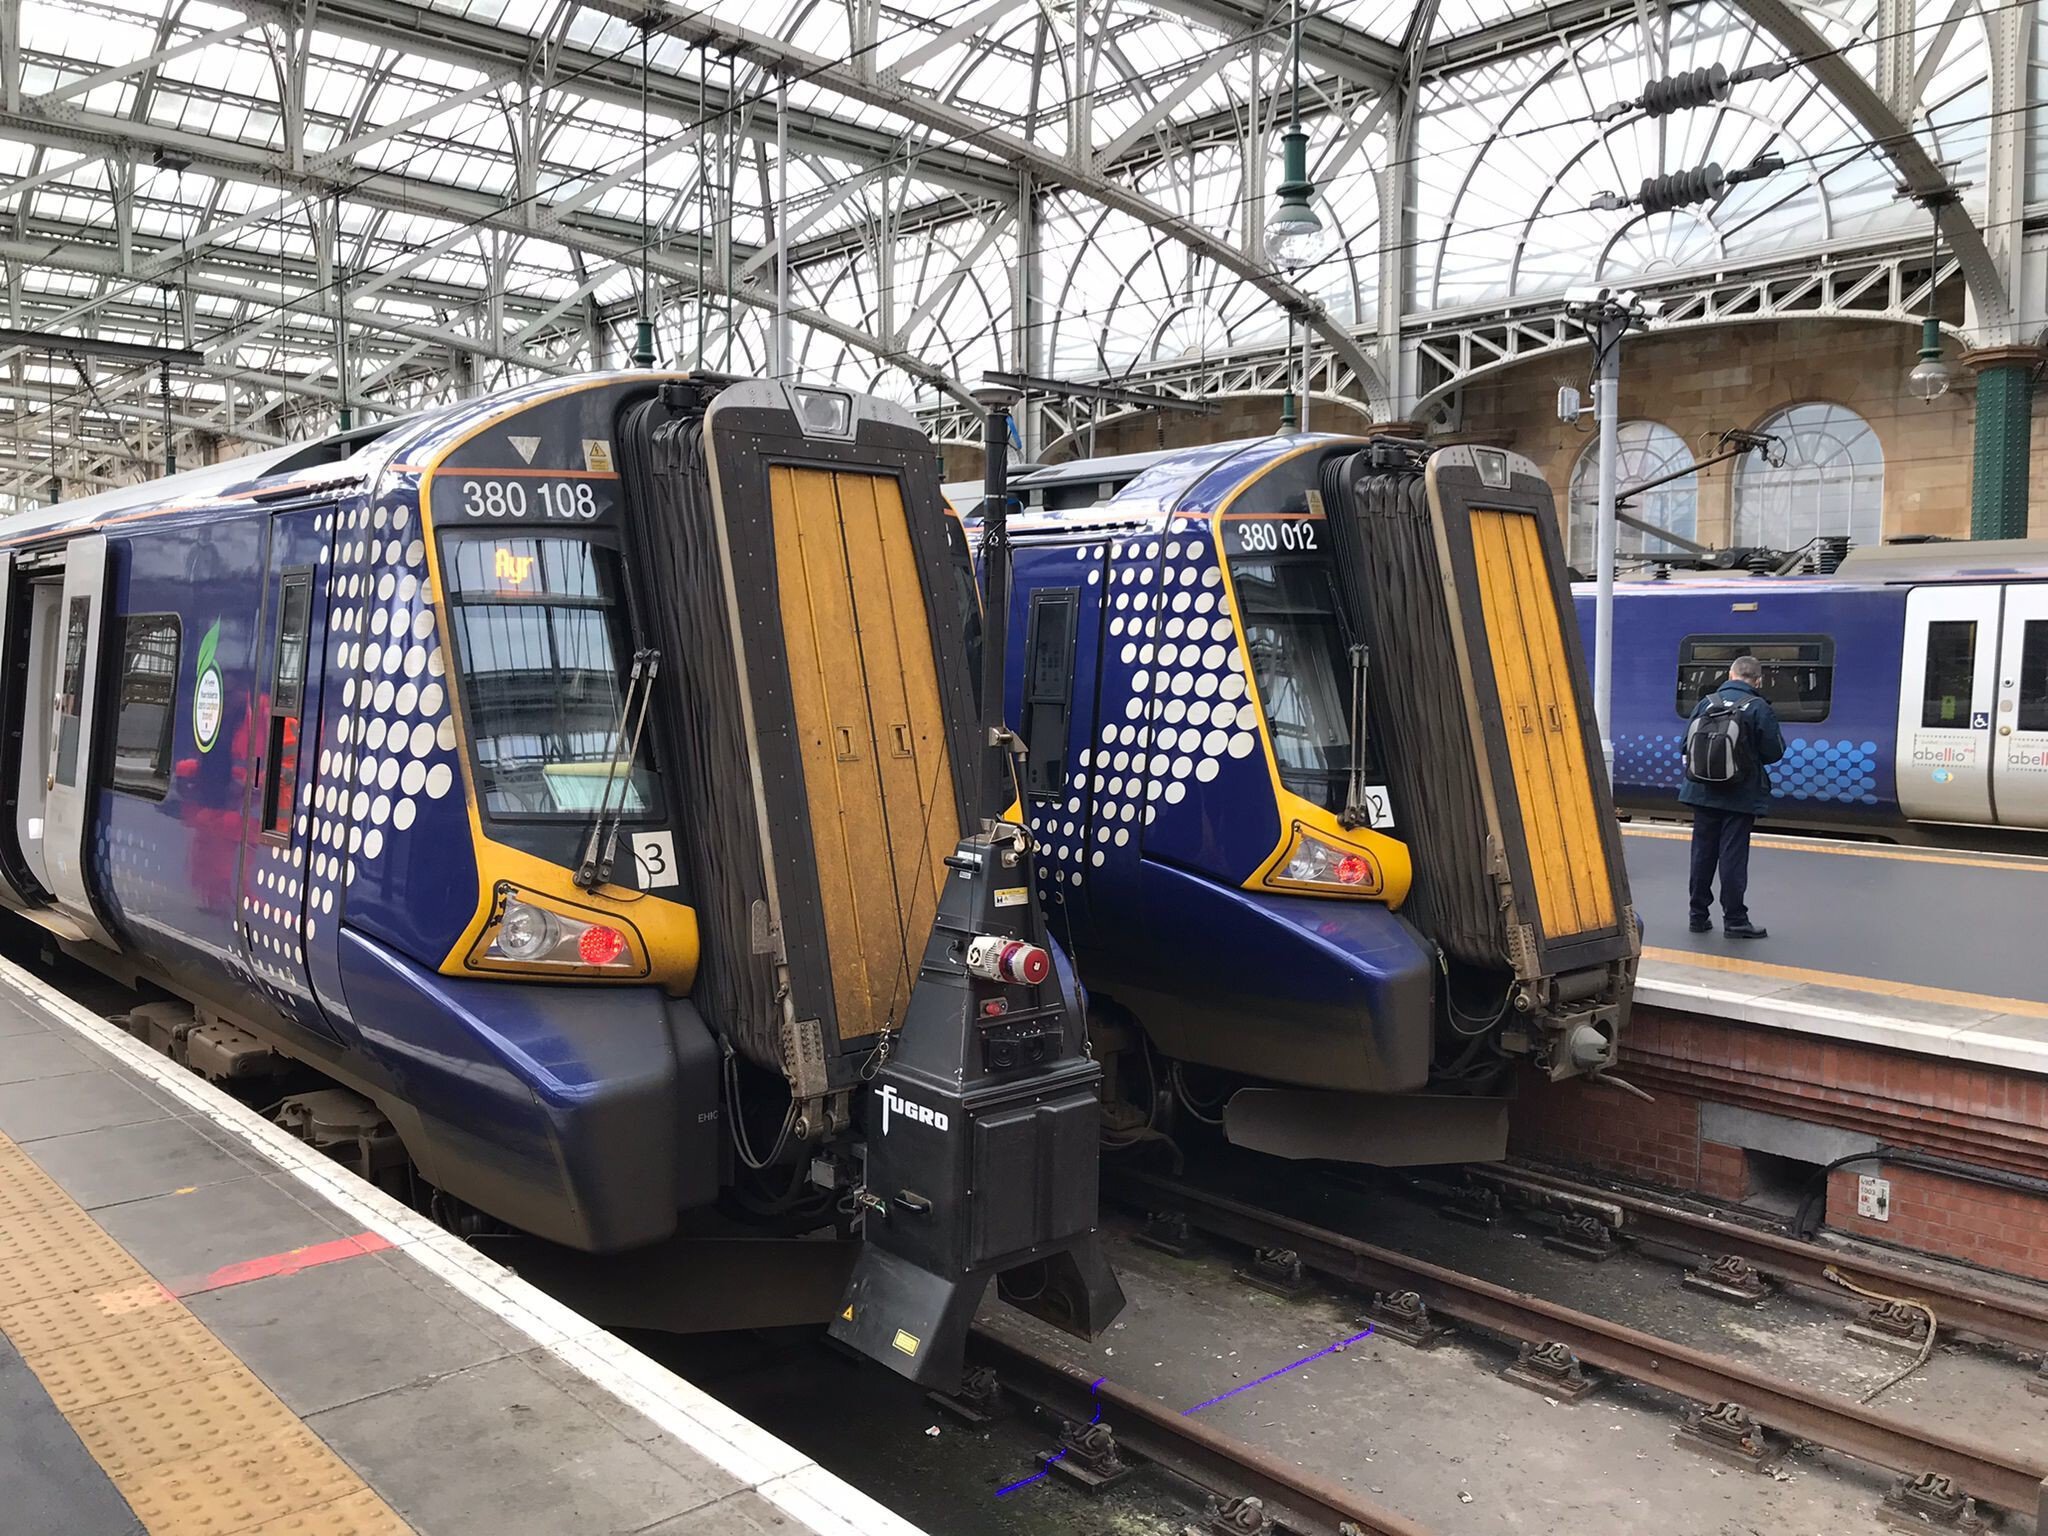 RILA® system mounted onto in-service Scotrail passenger trains